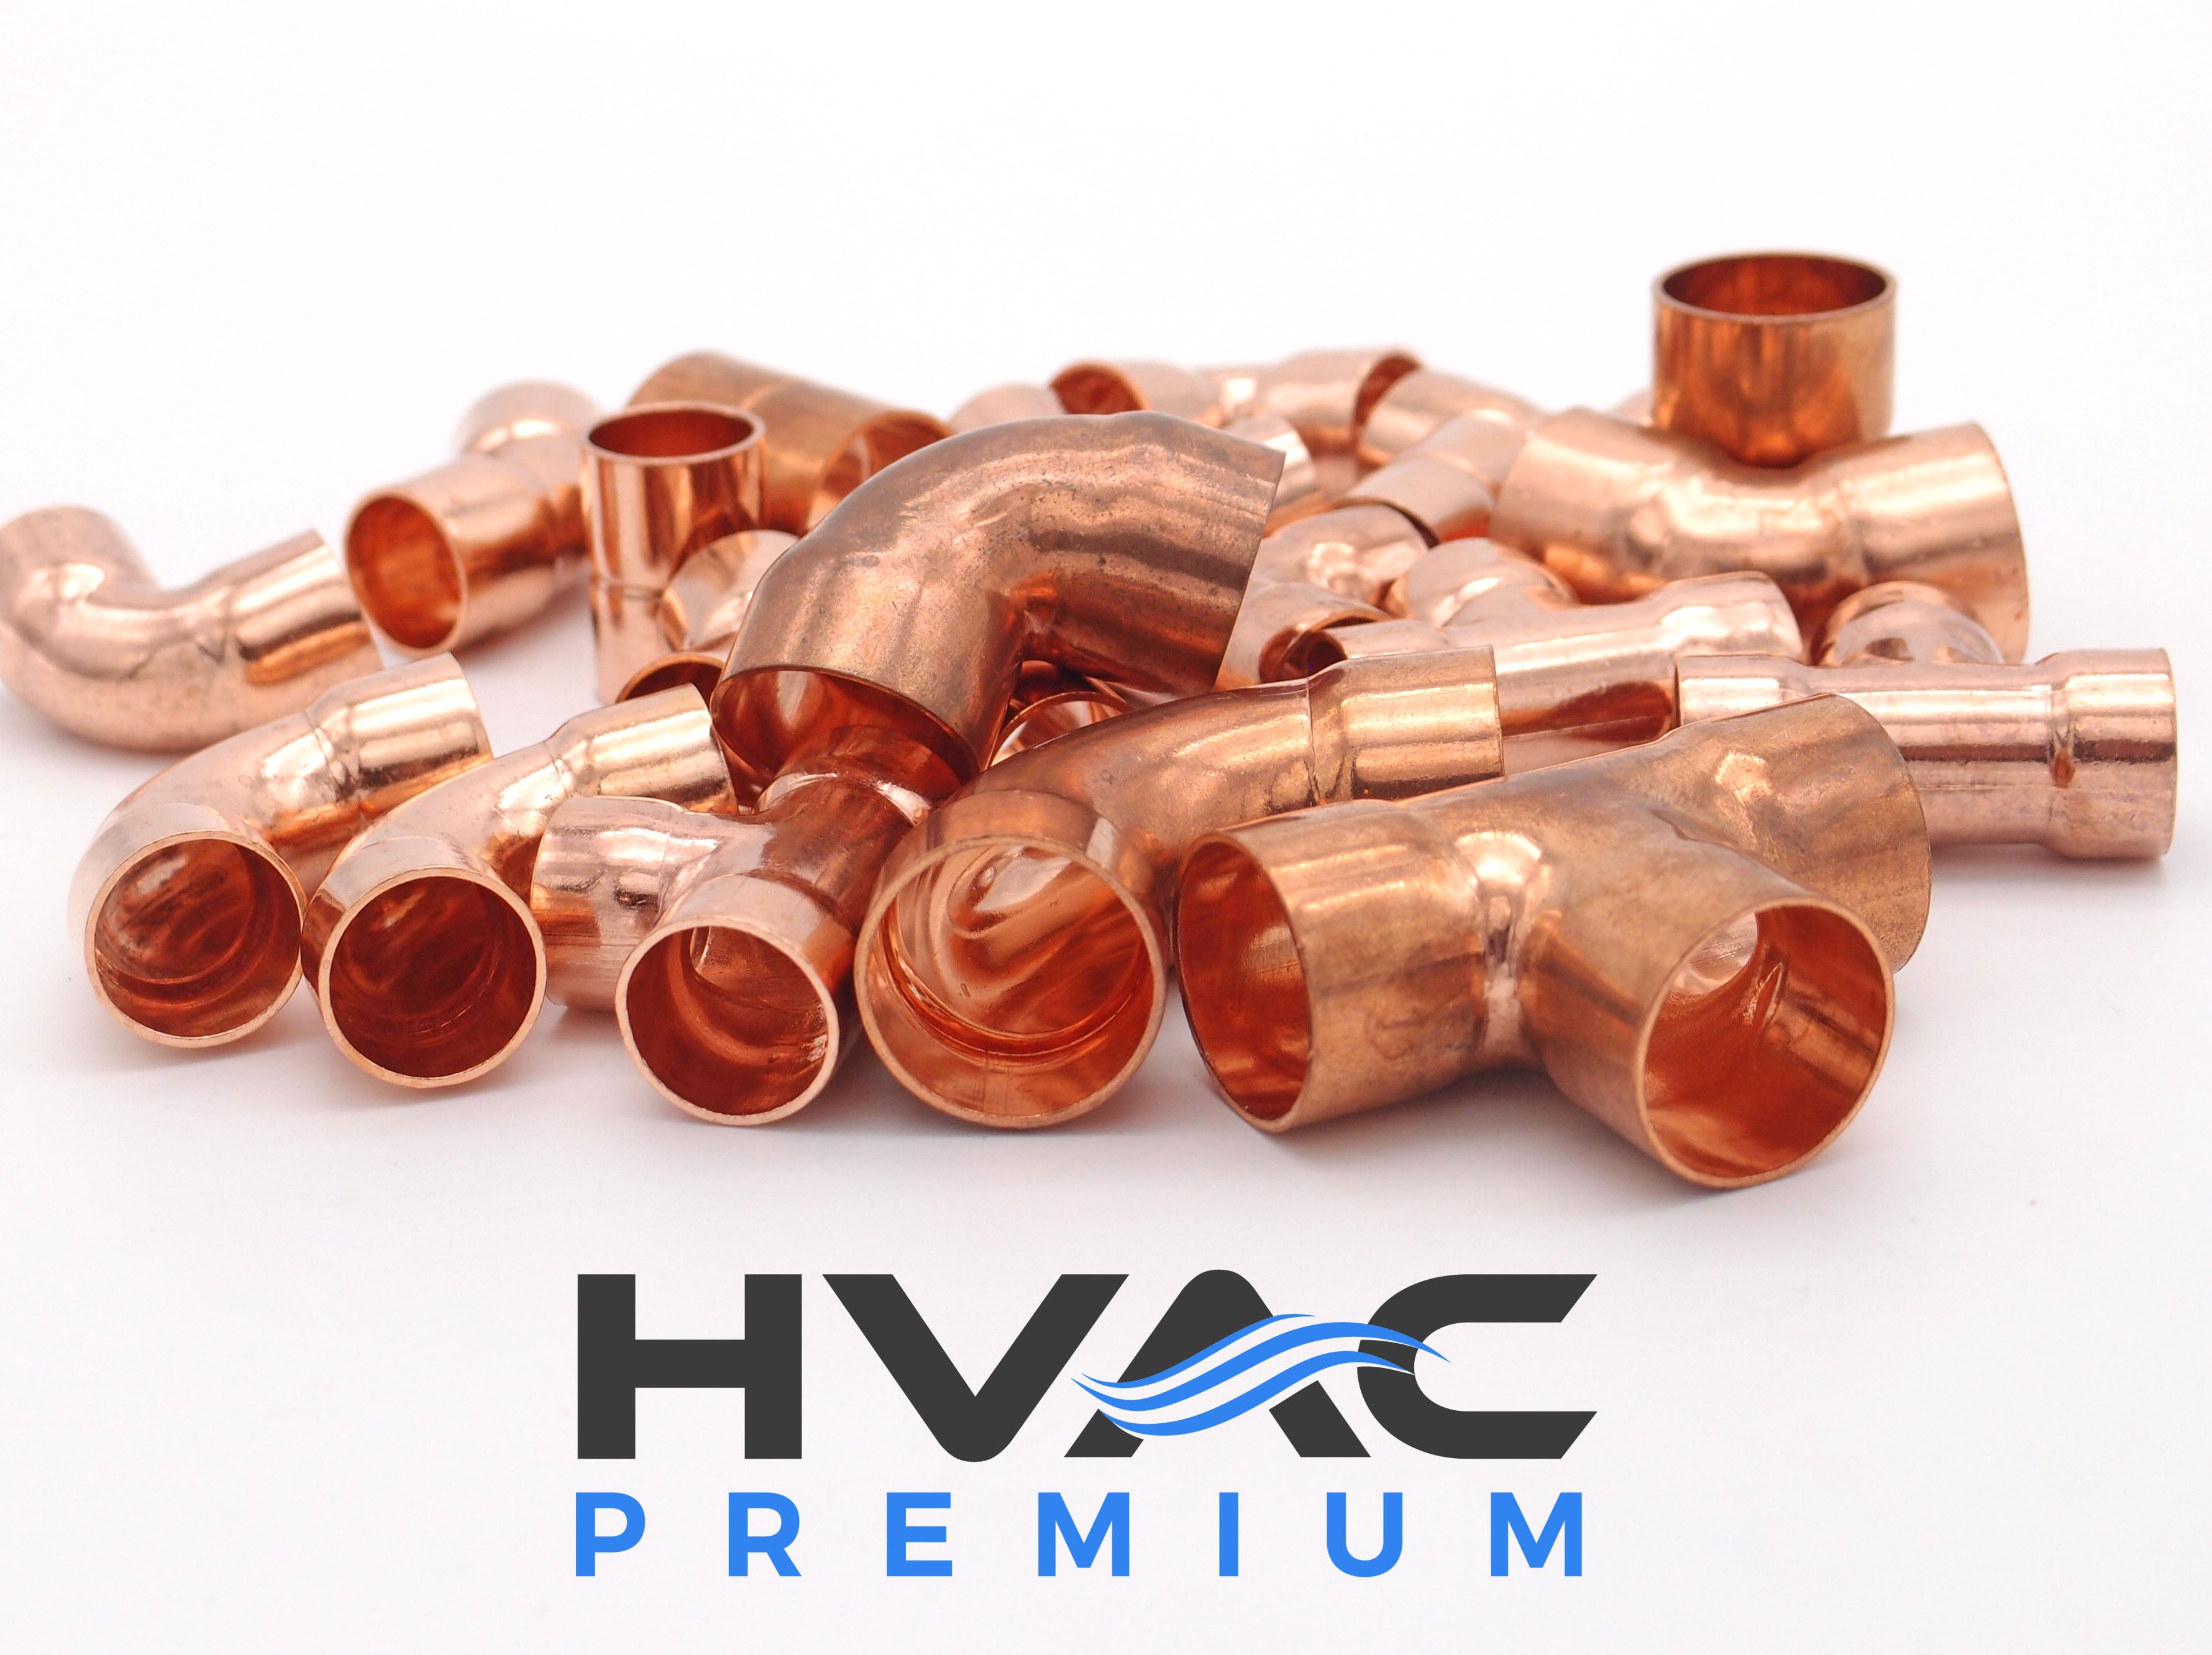 Copper Fitting 1-1/8 to 1 (HVAC Dimensions) Reducer / Increaser Copper Coupling & HVAC – 1 to 7/8 (Plumbing Inner Dimensions) 99.9% Pure Copper - 5 Pack